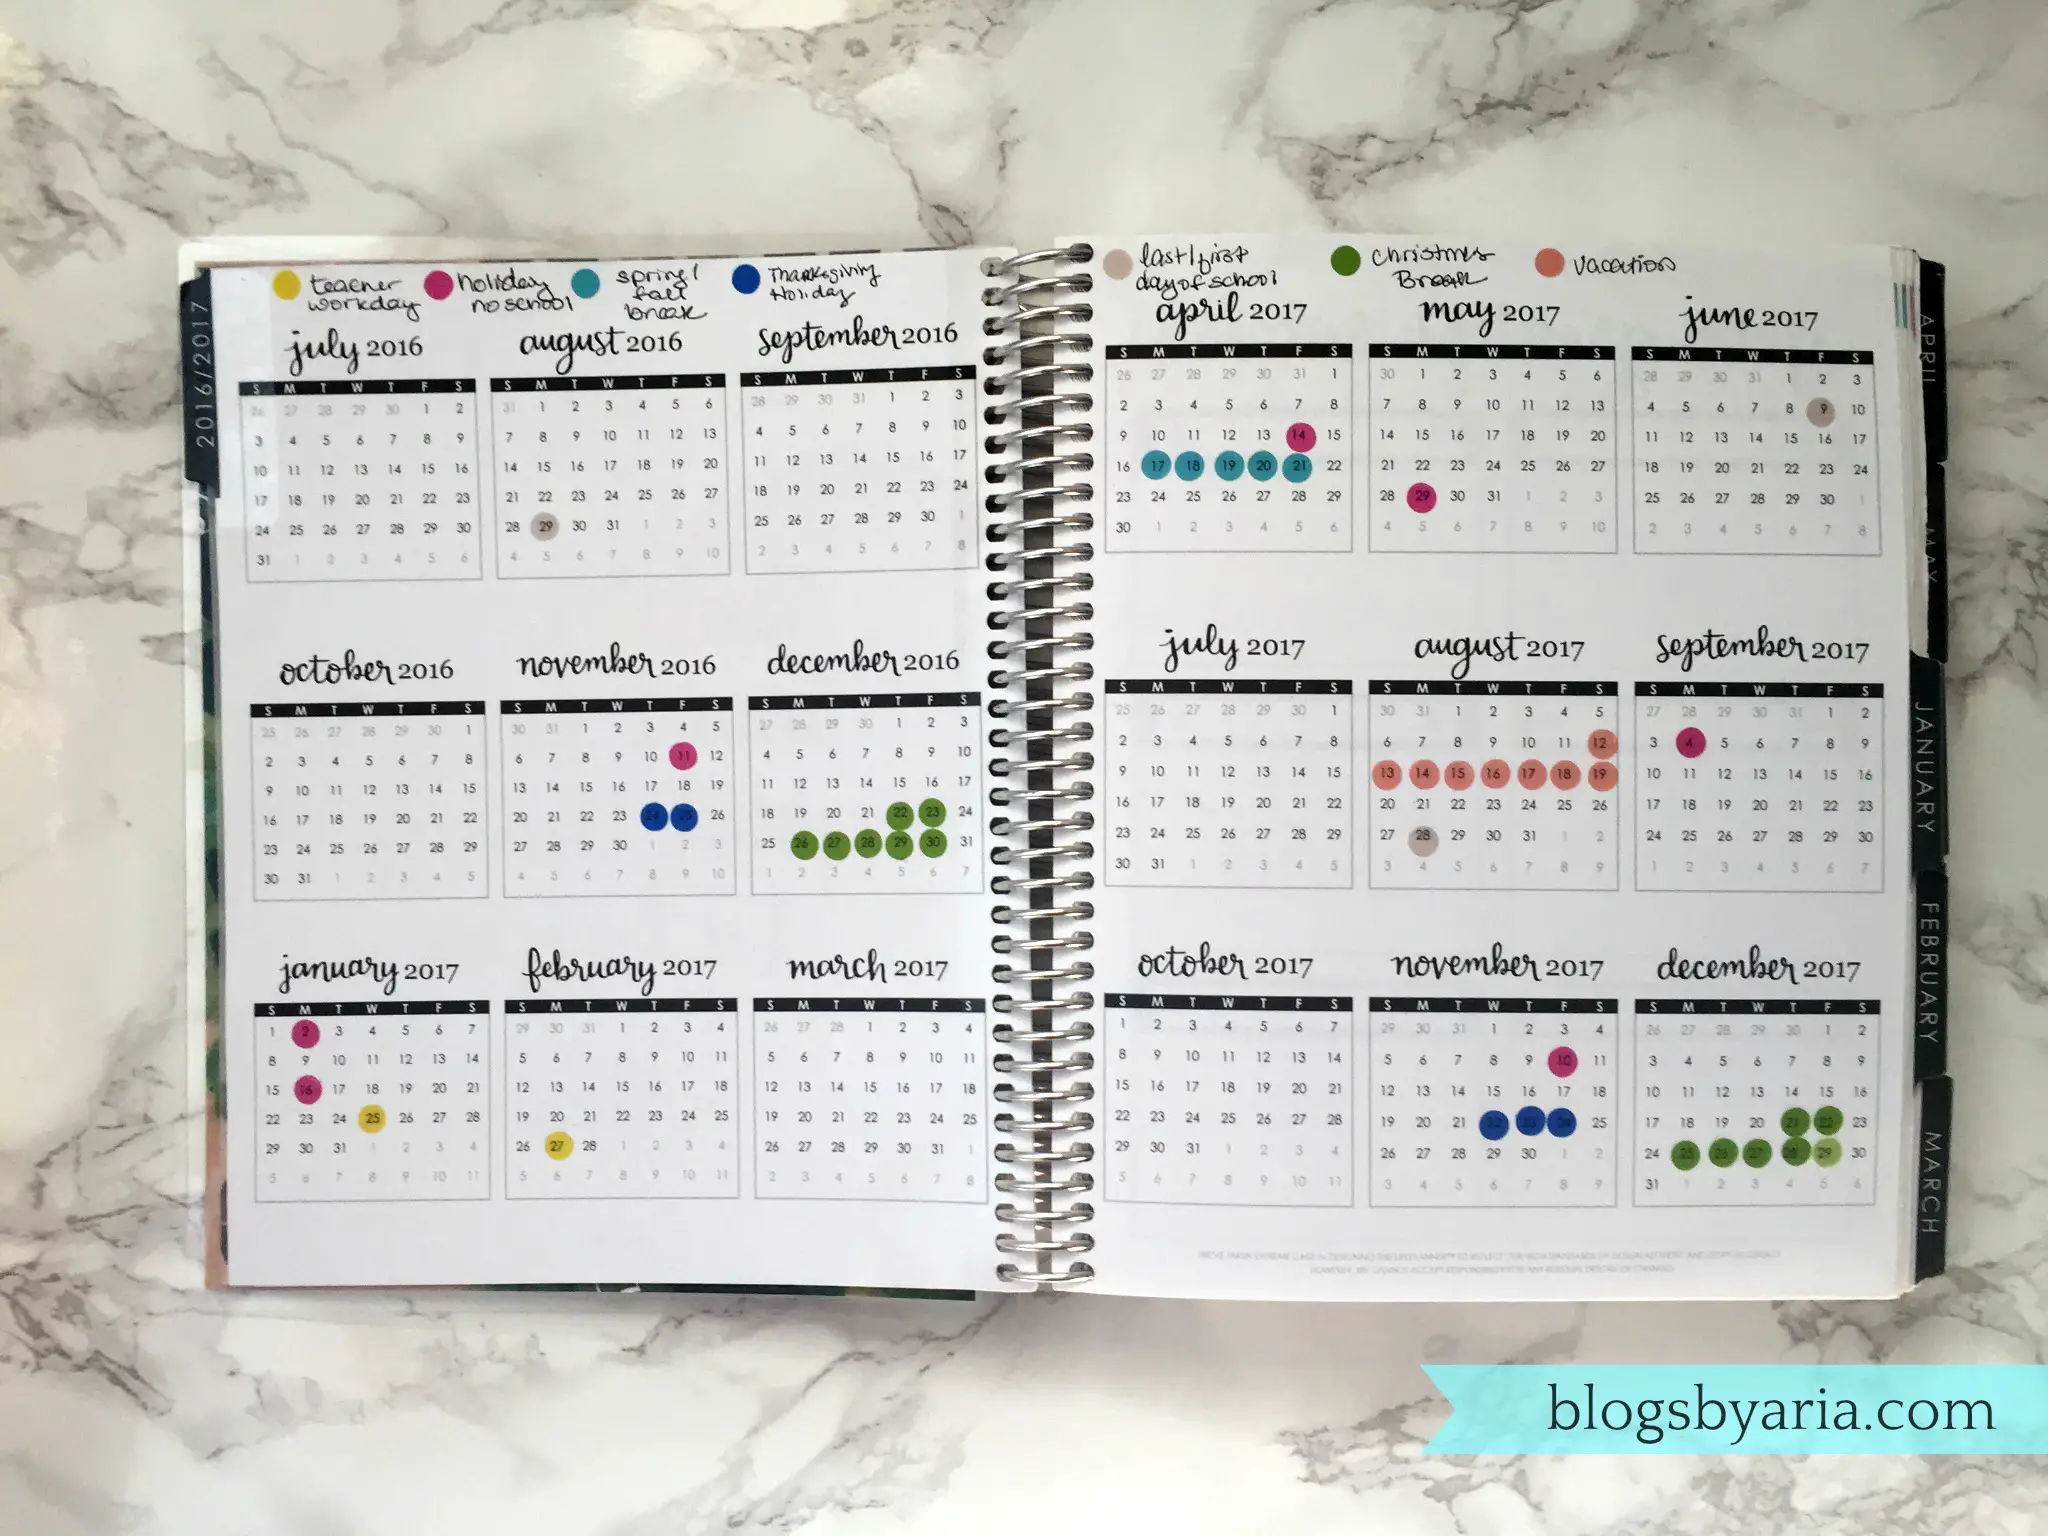 Year at a Glance -- Prepping Your Planner for the New Year